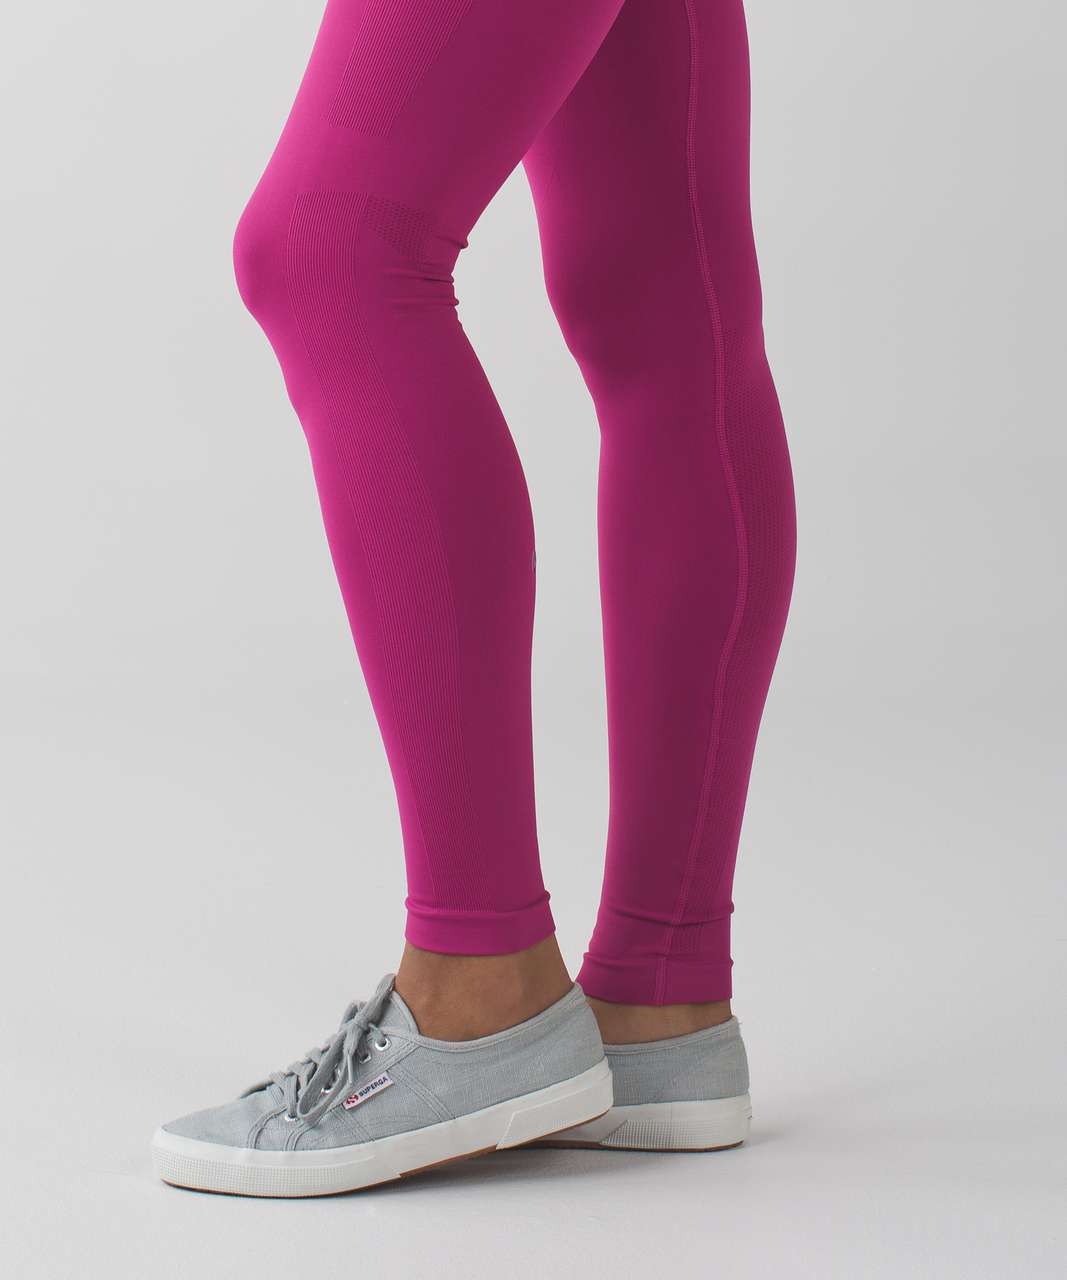 Lululemon Ultraviolet Pink Seamless High Rise Zone In Tights, Women's 4